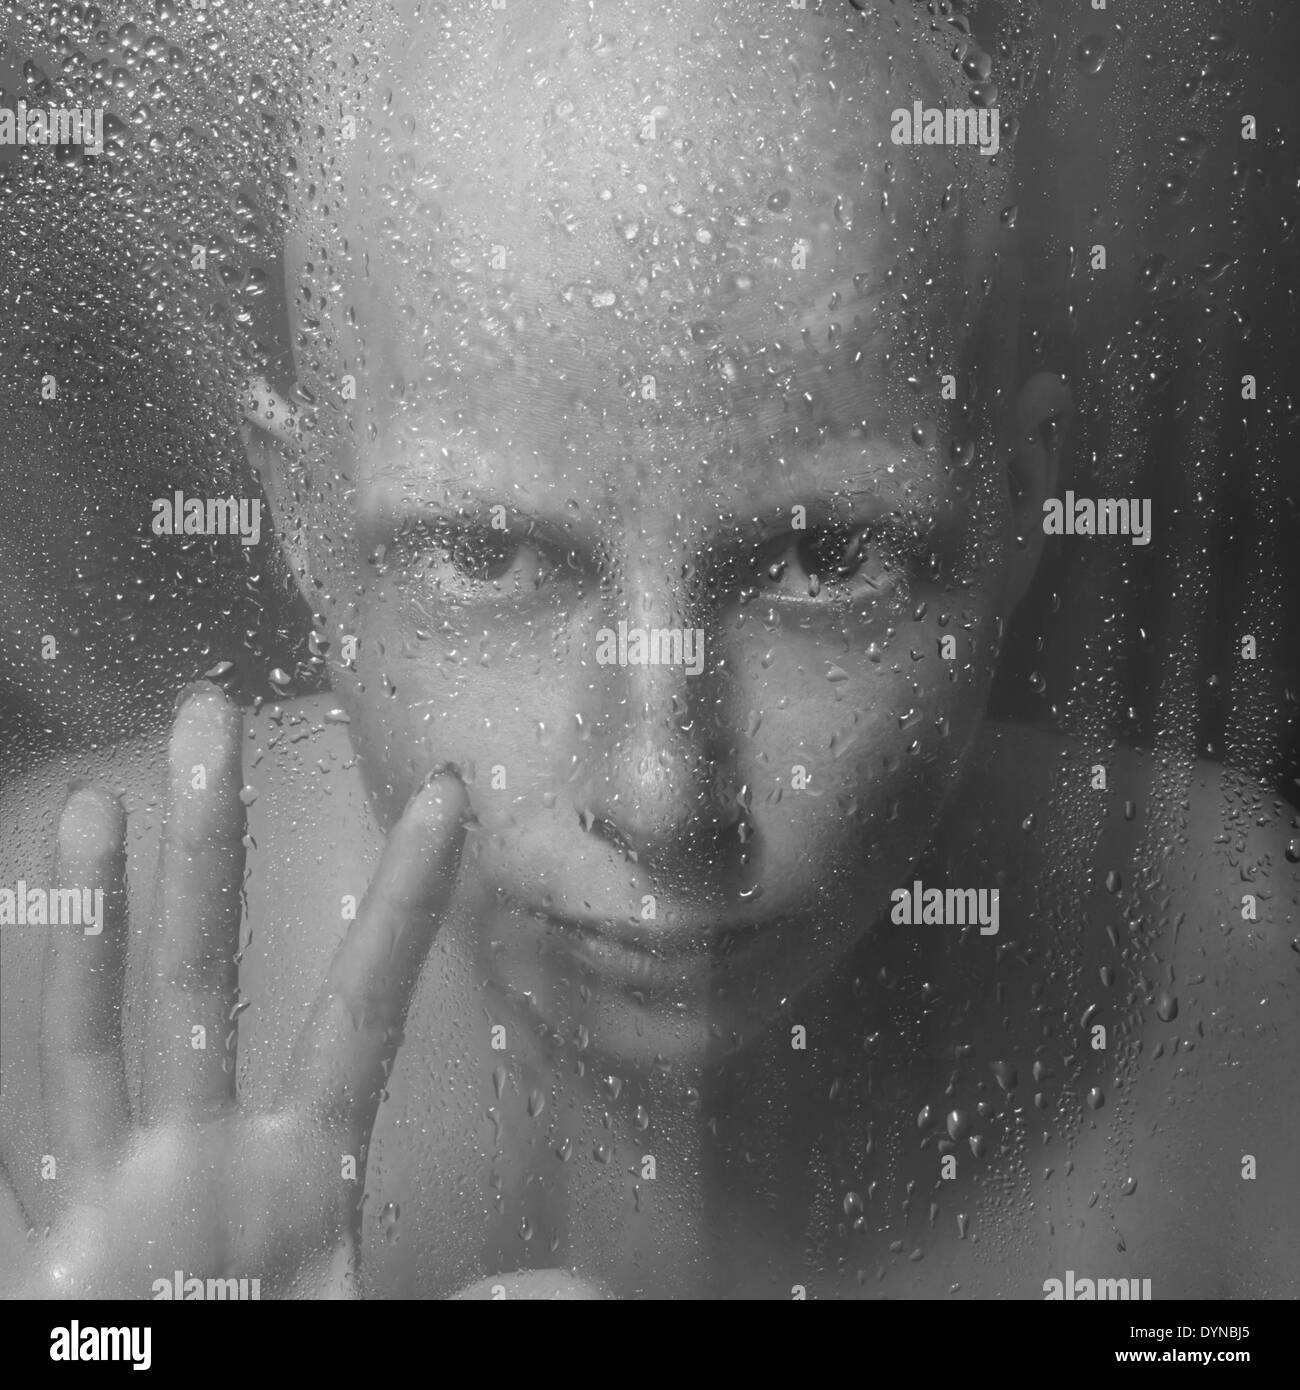 Caucasian woman peering through glass humide Banque D'Images